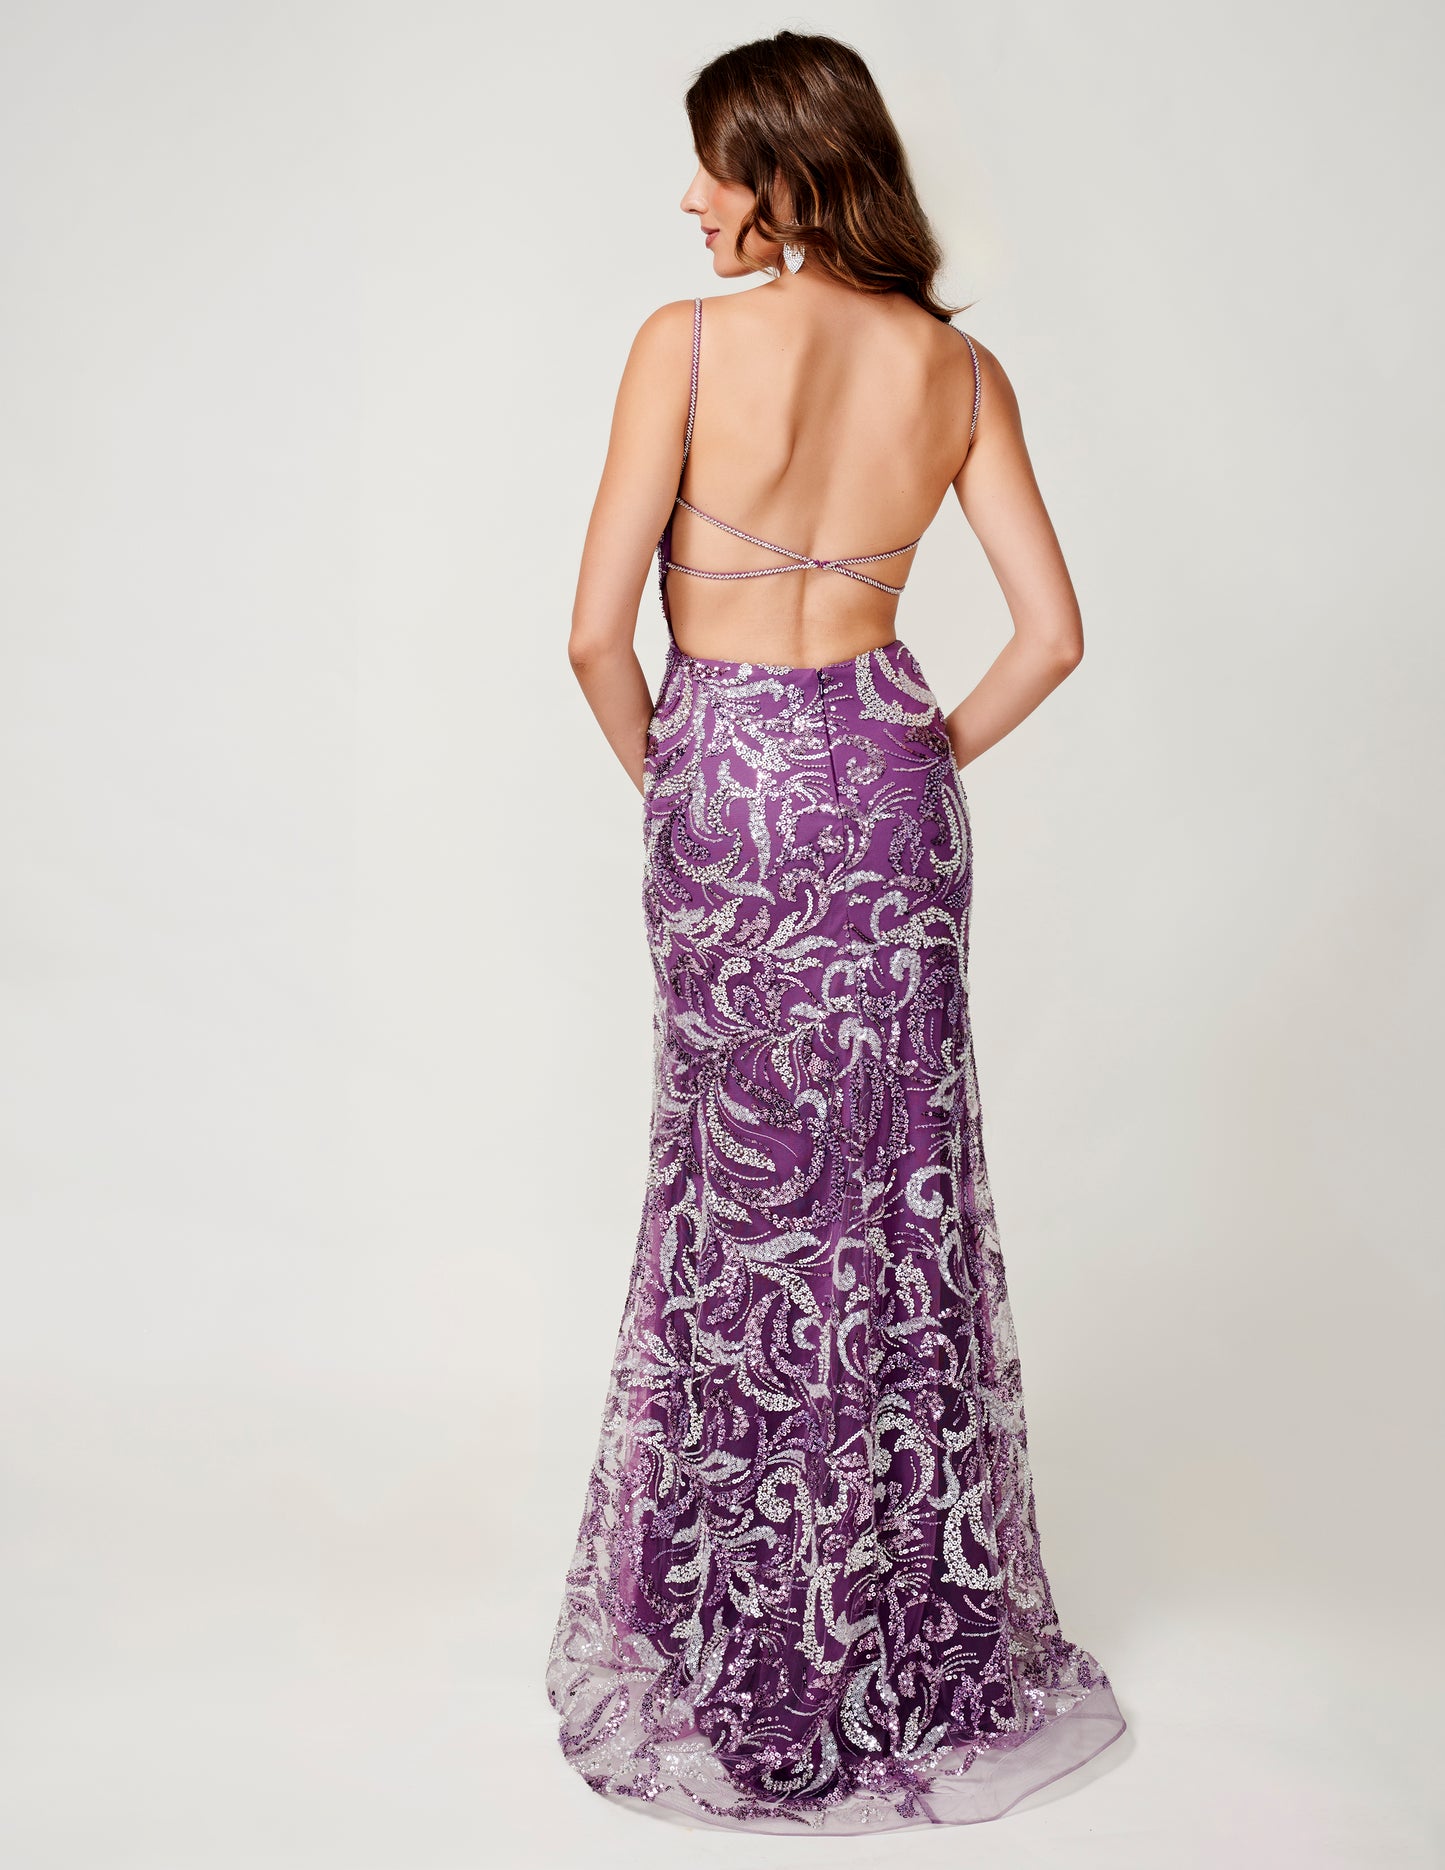 Nina Canacci presents an elegant formal dress for your next special occasion. With intricate beaded and sequin details, this backless gown features a stunning v-neck and thigh-high slit for a touch of glamour. Make a statement at prom or any evening event with this show-stopping design.